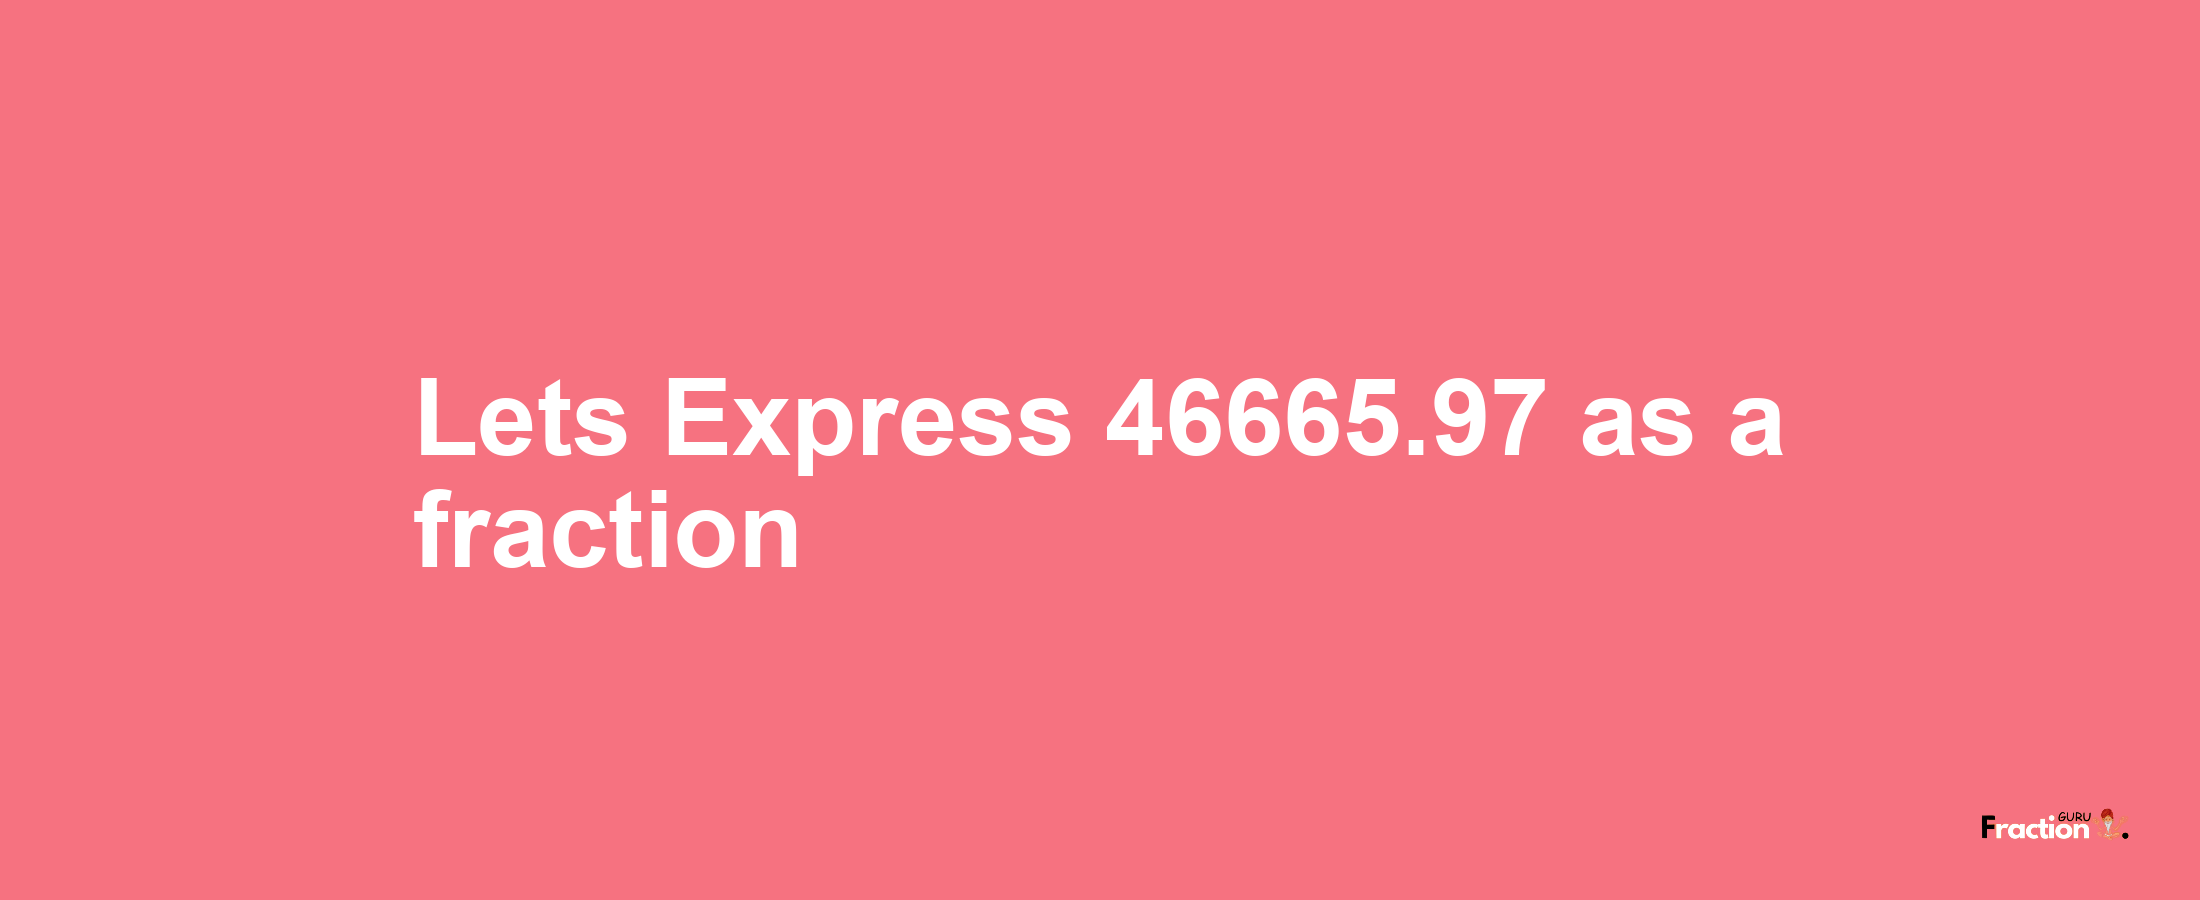 Lets Express 46665.97 as afraction